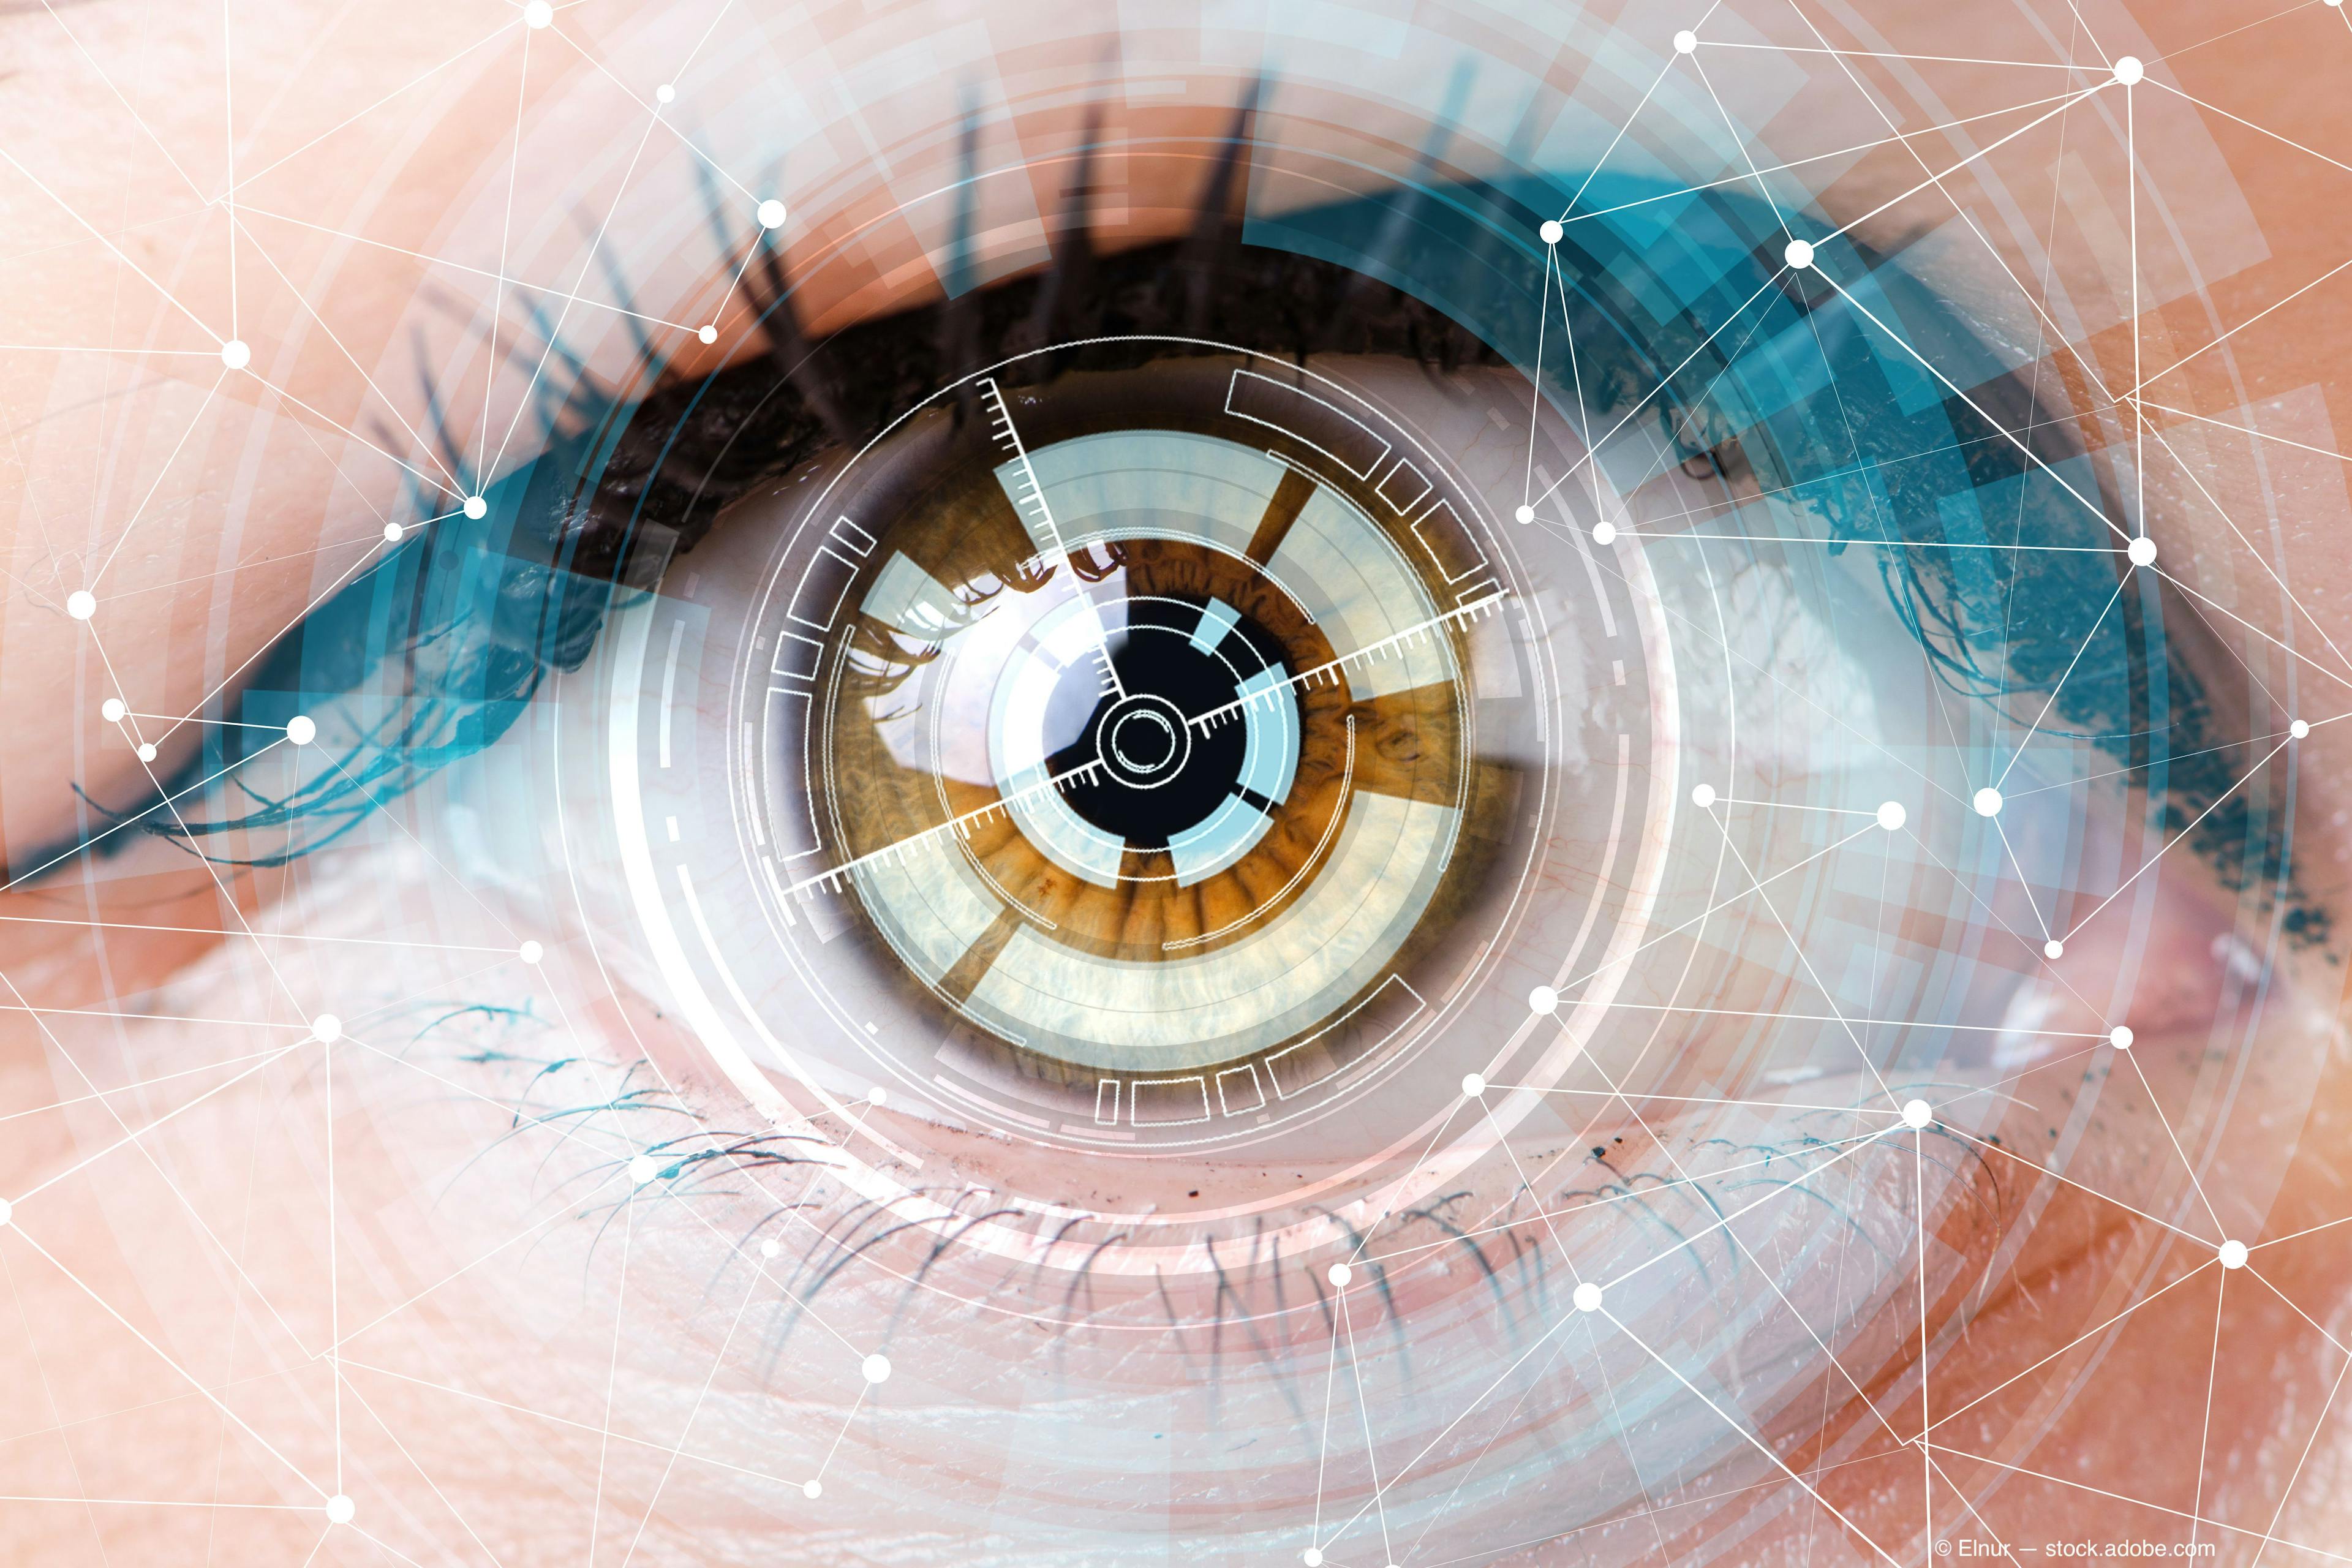 Cutting-edge neuro-ophthalmology:  Combining artificial intelligence, eye tracking